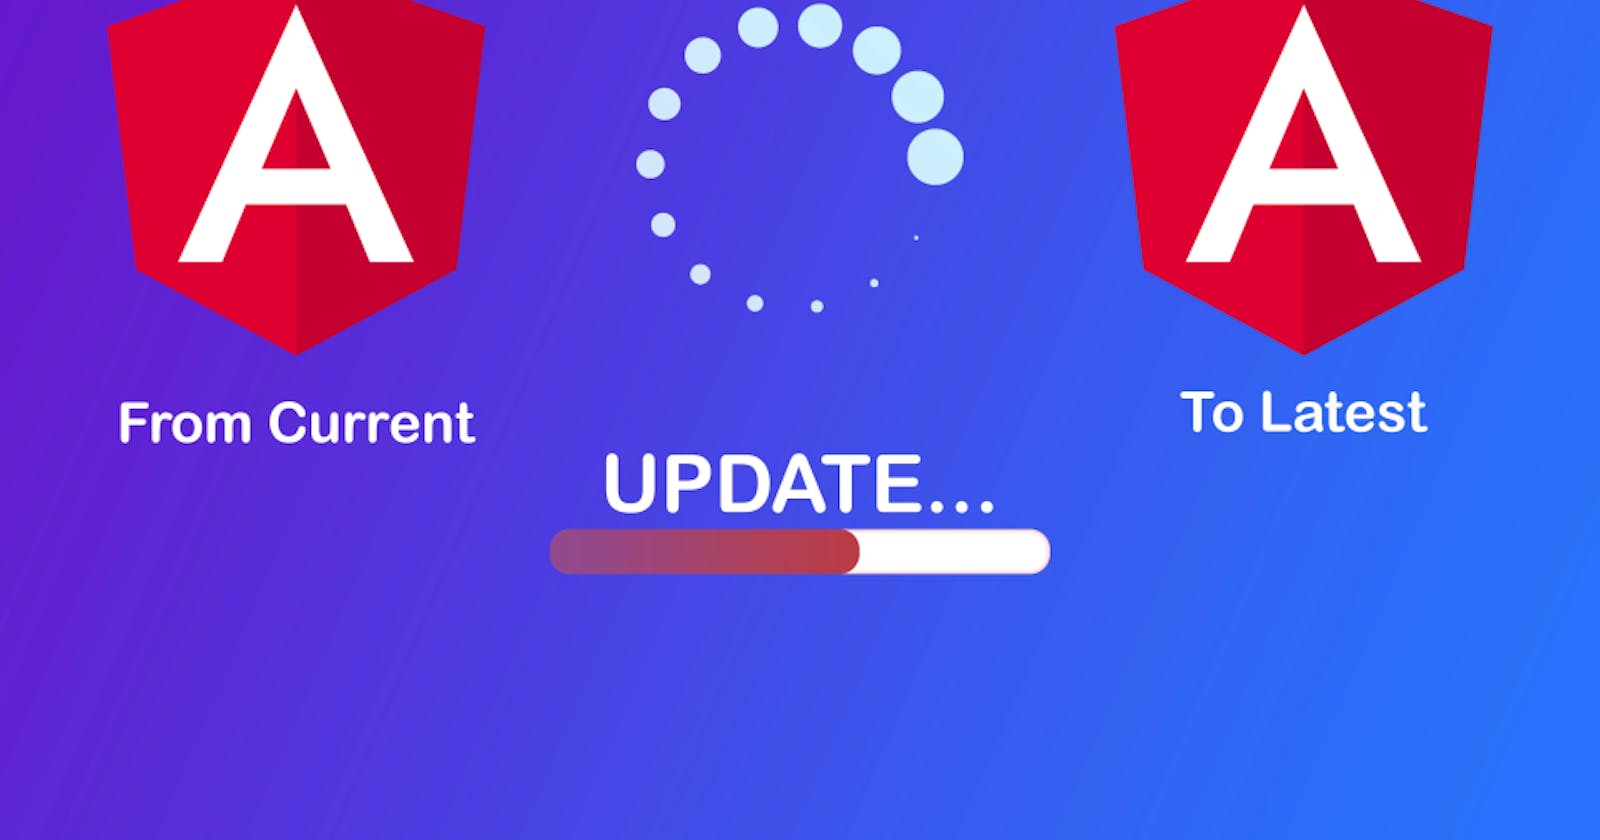 Updating Angular Applications to the Latest Version